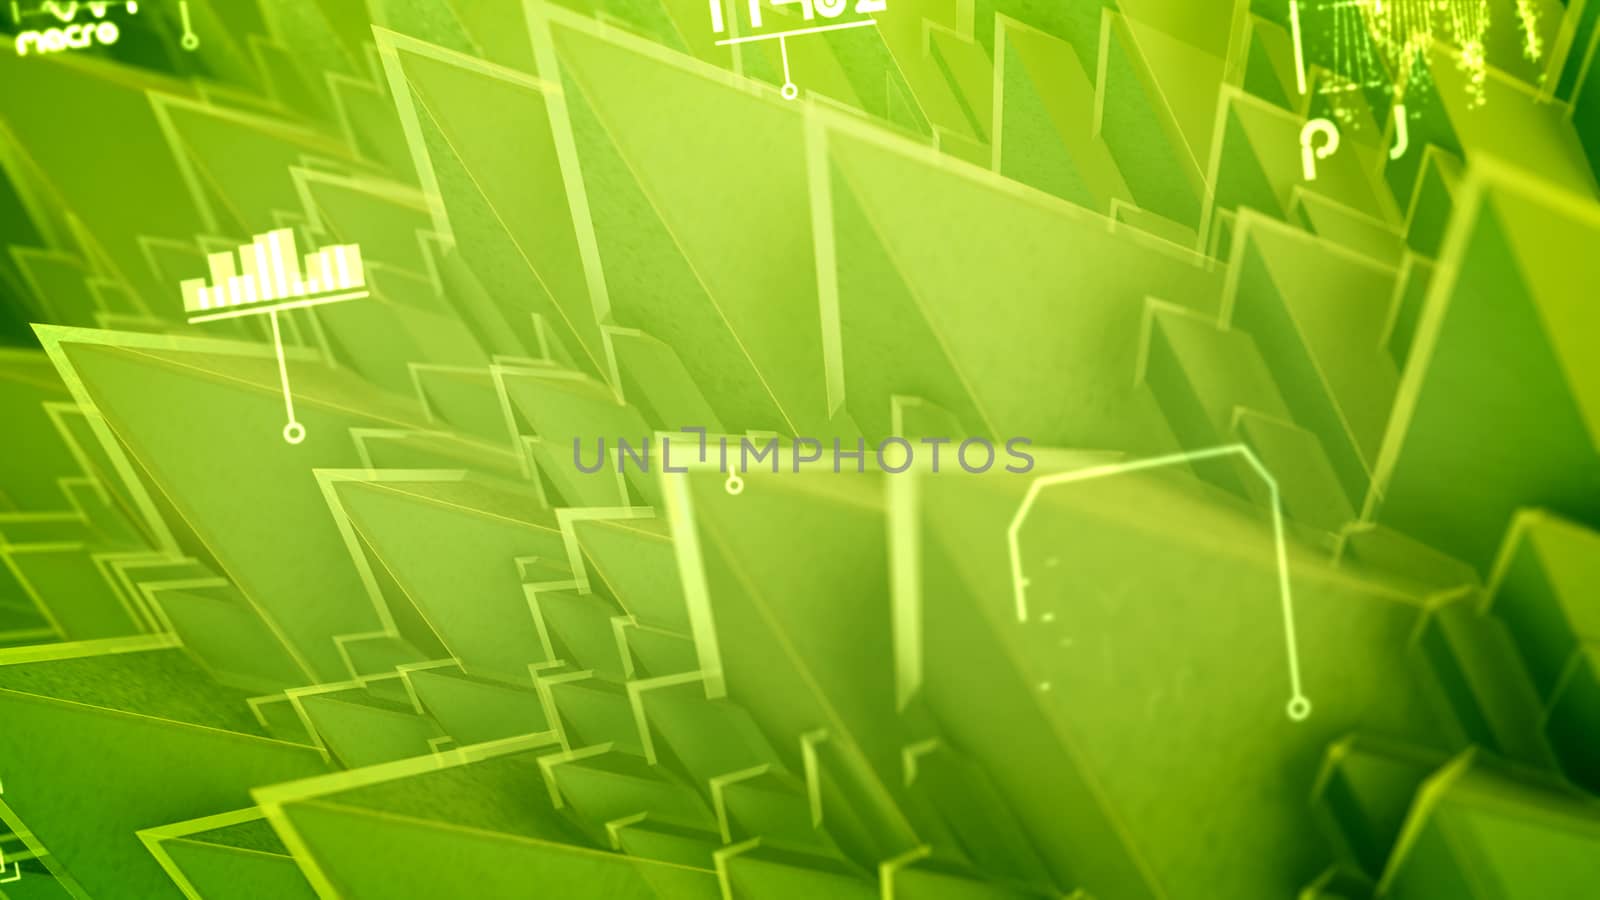 Cyber 3d illustration of nano pyramids with sharp and steep slopes, rotating spirals, changing words, shimmering numbers in the salad background. It looks hi-tech and fine. 